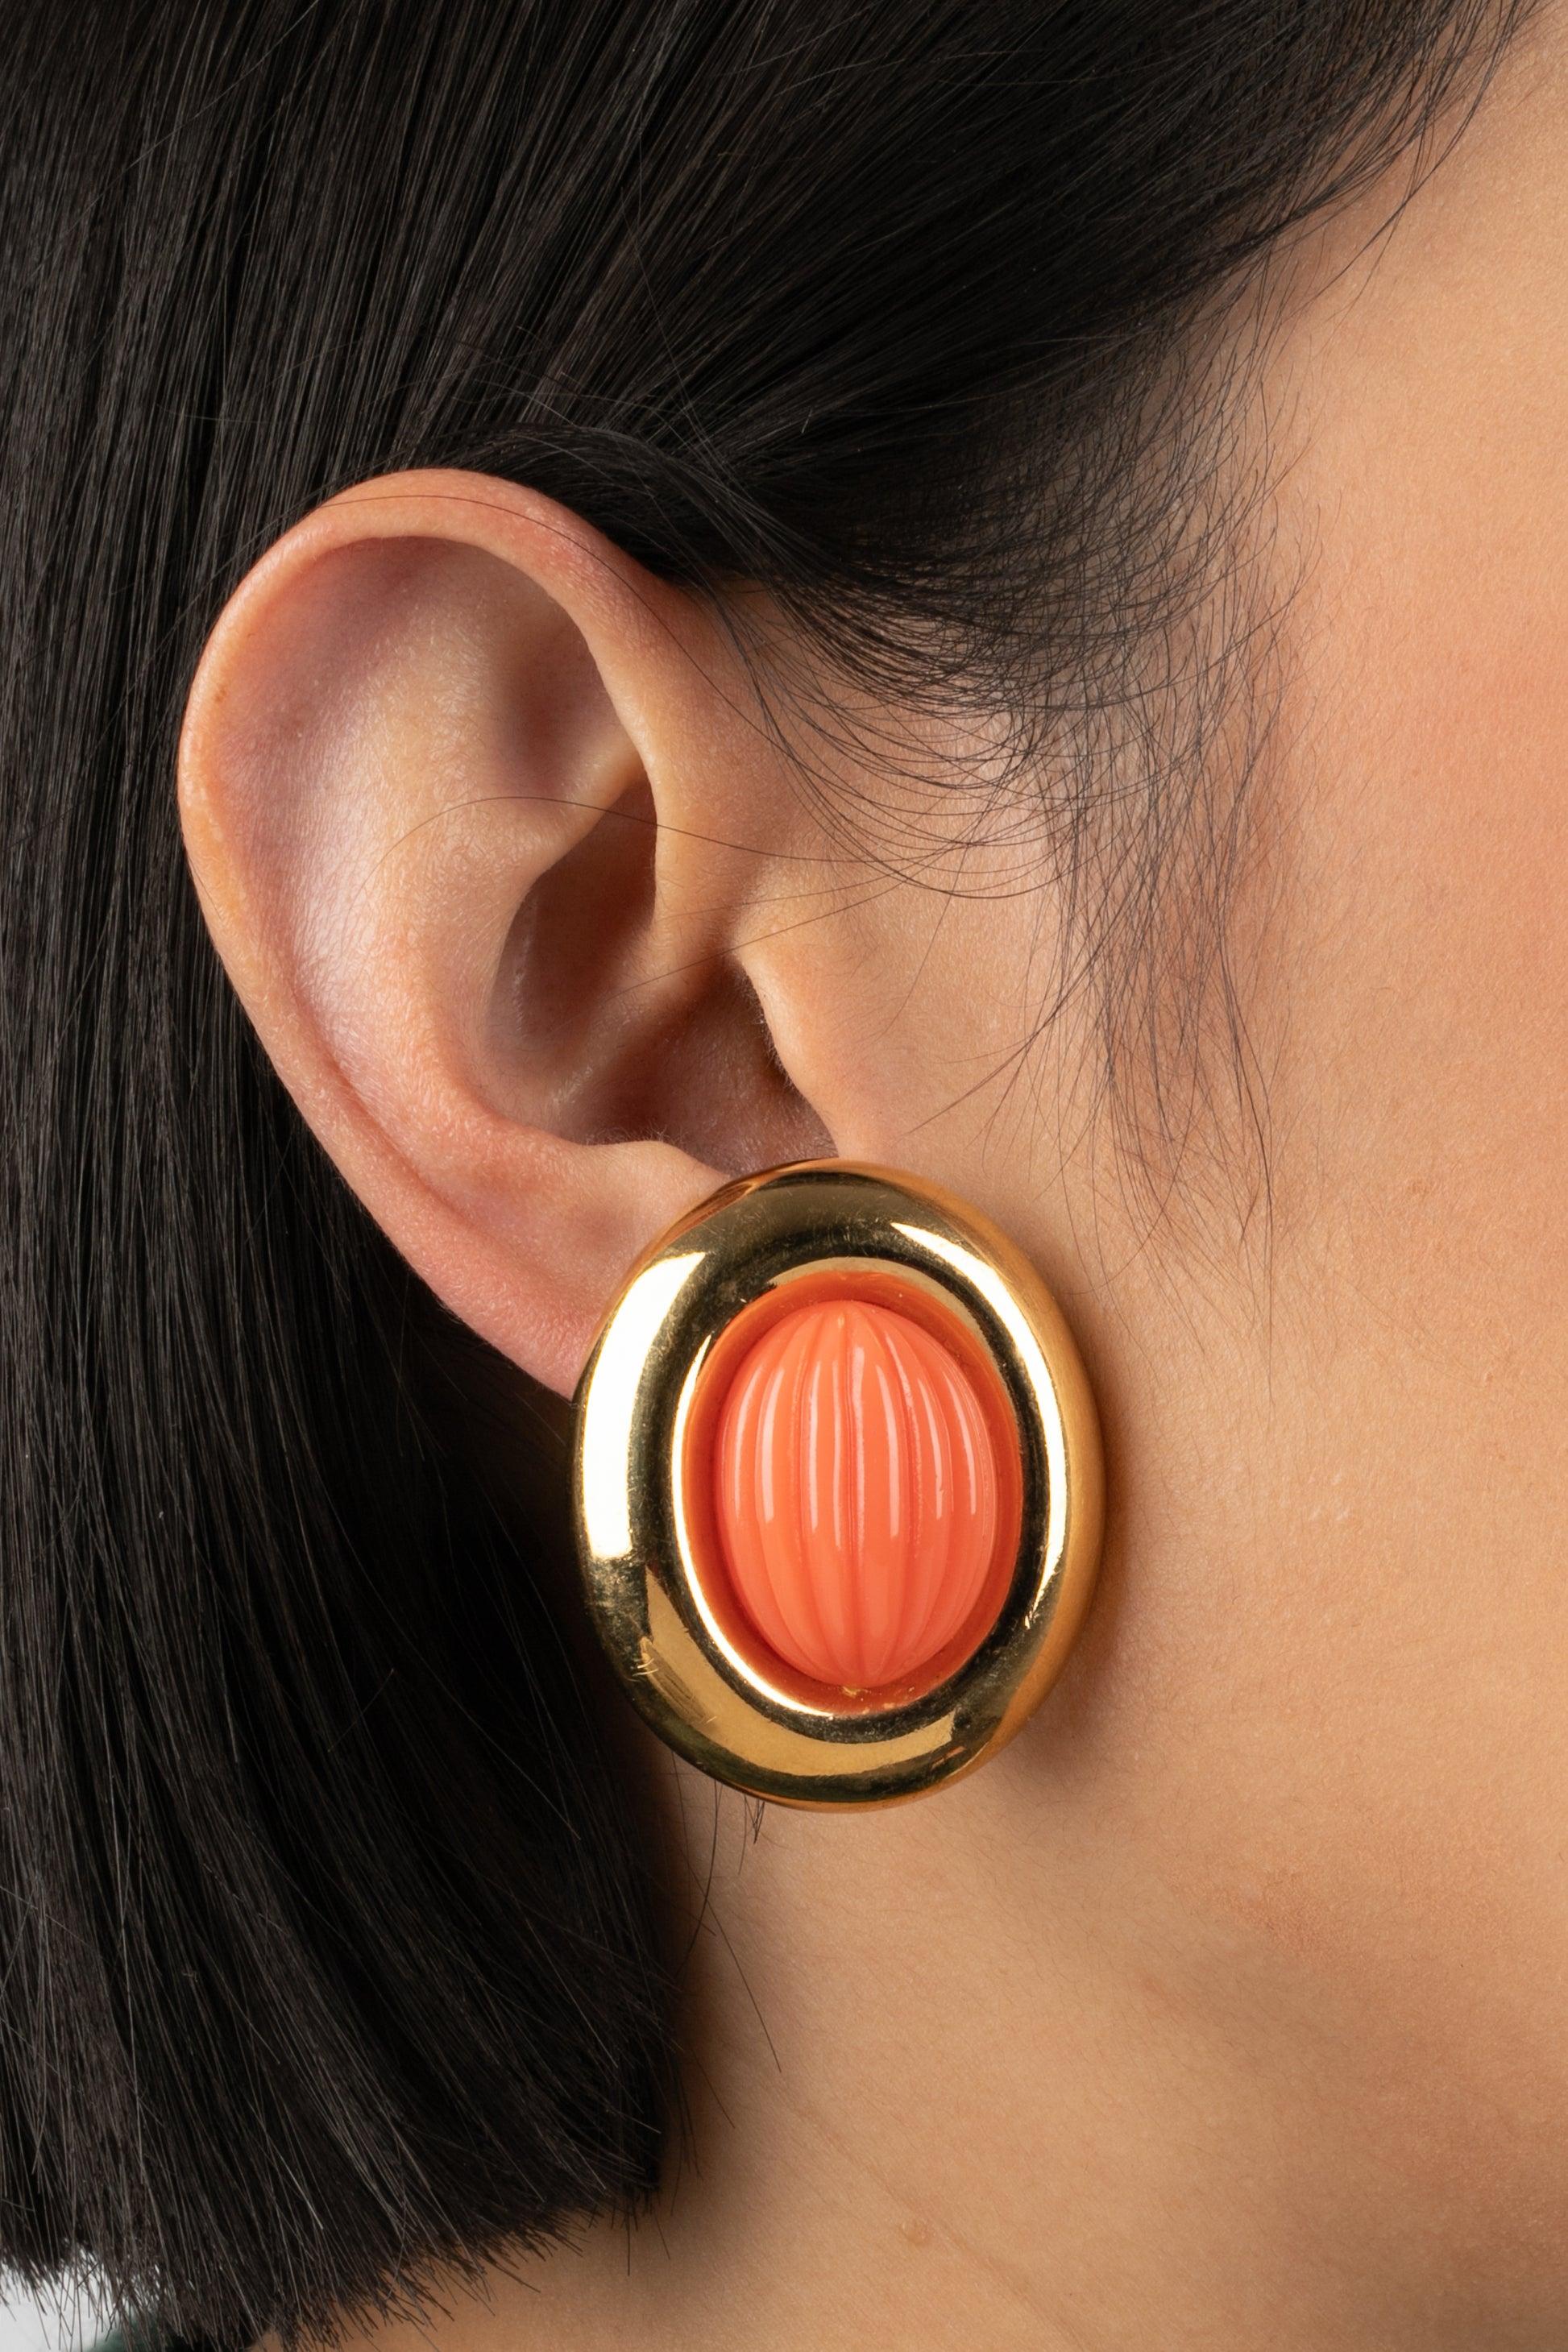 Valentino - Golden metal clip-on earrings with resin cabochons.

Additional information:
Condition: Very good condition
Dimensions: Height: 4 cm

Seller Reference: BO120
